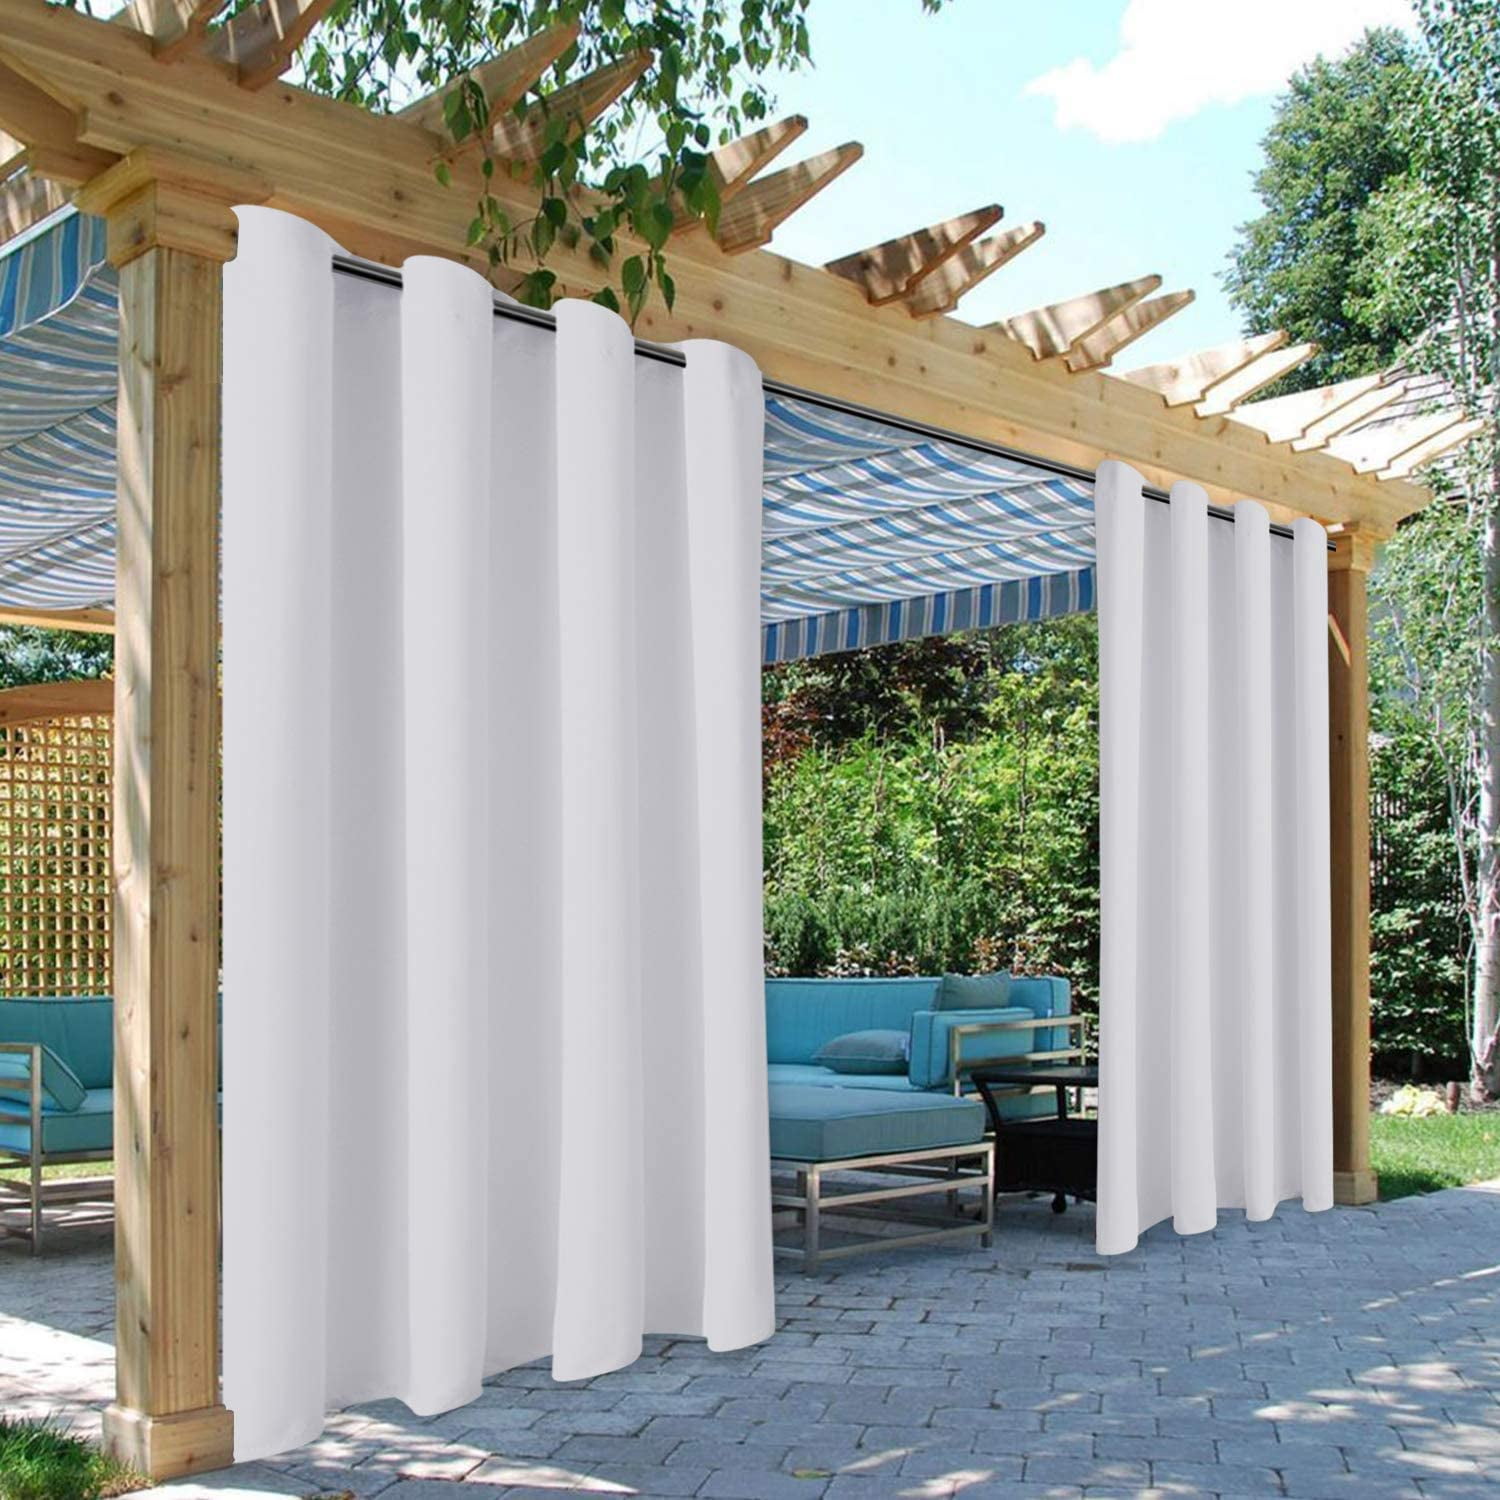 HOMEIDEAS Greyish White Outdoor Curtains for Patio Waterproof Extra Wide 100 X 96 Inch Blackout Outdoor Curtains 1 Panel Thermal Insulated Outdoor Patio Curtains for Porch/Pergola/Yard/Arbor/Pool 